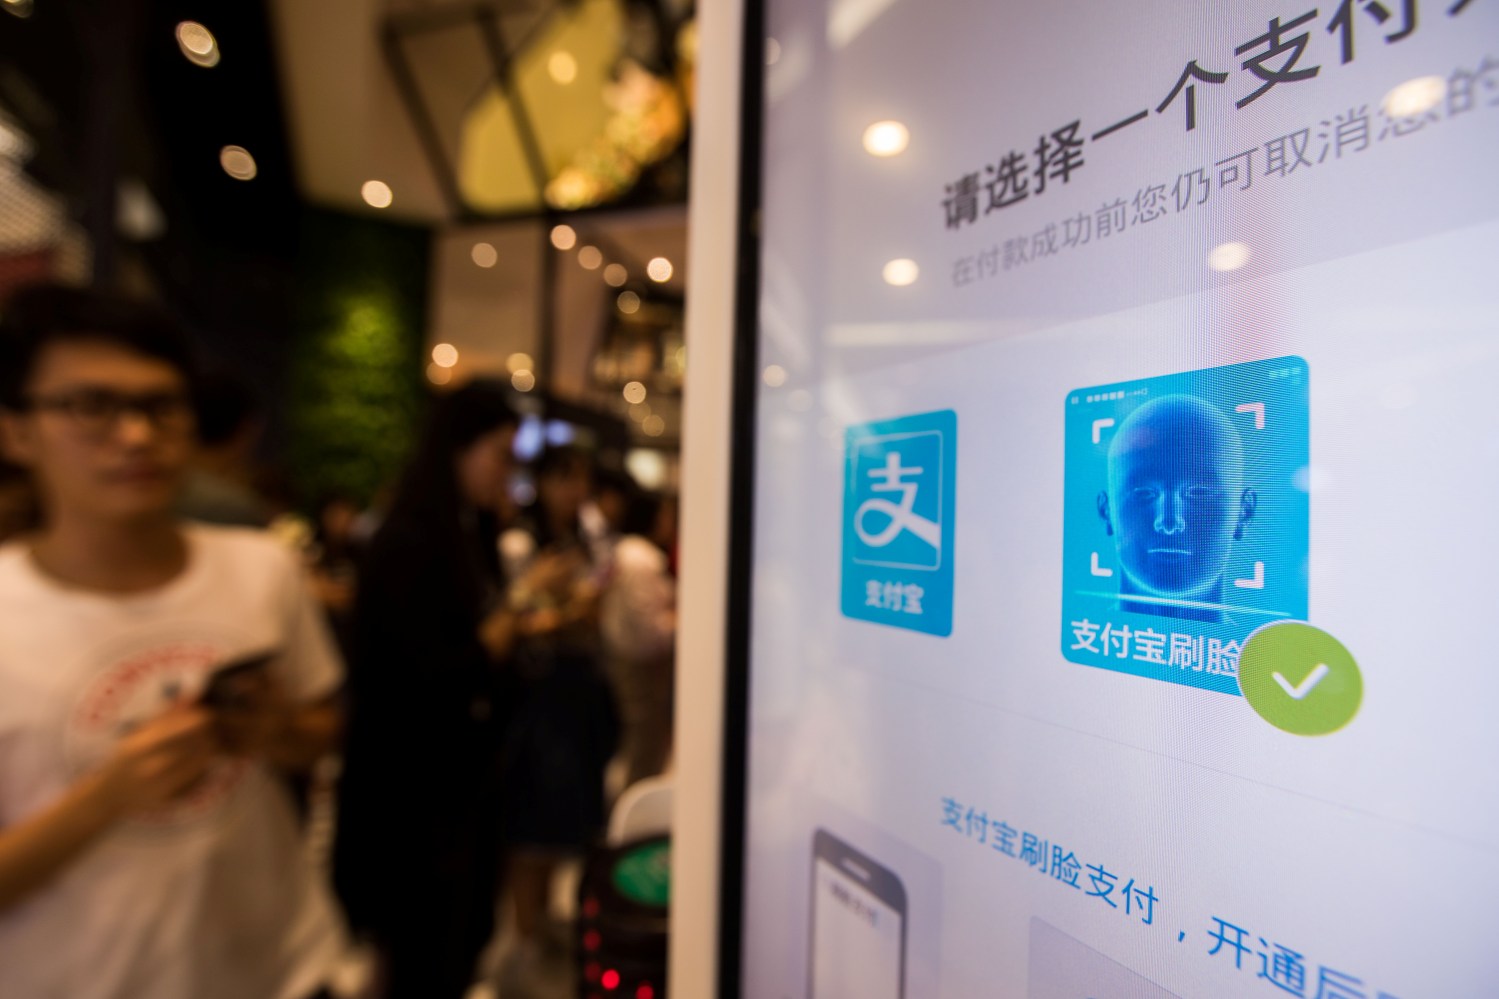 Alipay's facial recognition payment solution "Smile to Pay" is seen at KFC's new KPRO restaurant in Hangzhou, Zhejiang province, China September 1, 2017.  REUTERS/Stringer ATTENTION EDITORS - THIS IMAGE WAS PROVIDED BY A THIRD PARTY. CHINA OUT. NO COMMERCIAL OR EDITORIAL SALES IN CHINA. - RC13F17F7AA0